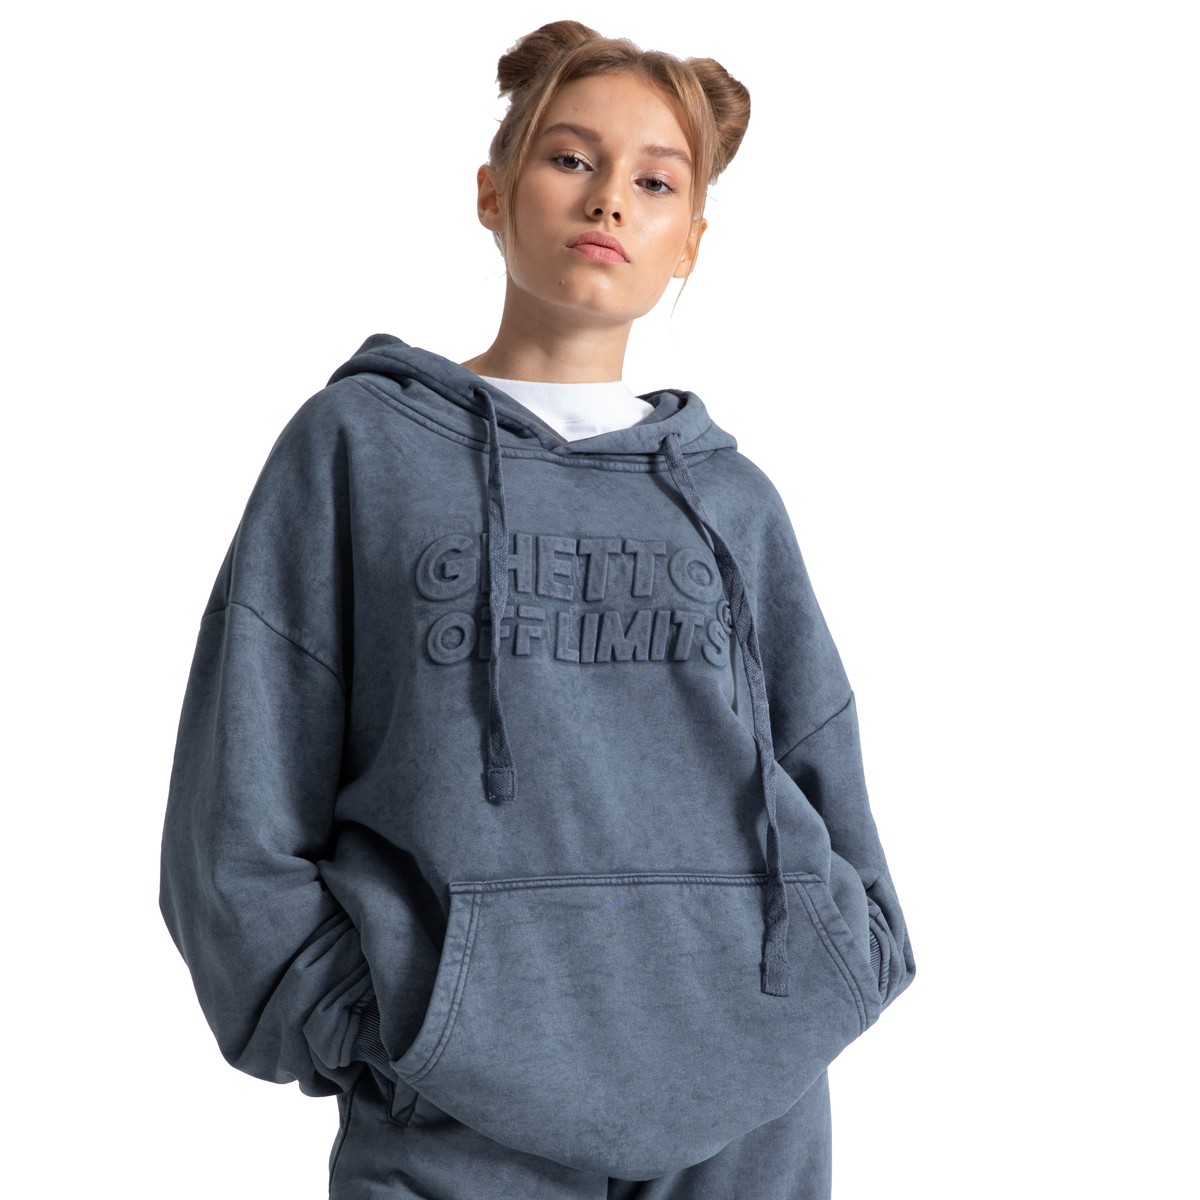 Ghetto Off Limits Acid Wash Anthracite Over Size Sweatshirt HD-10009